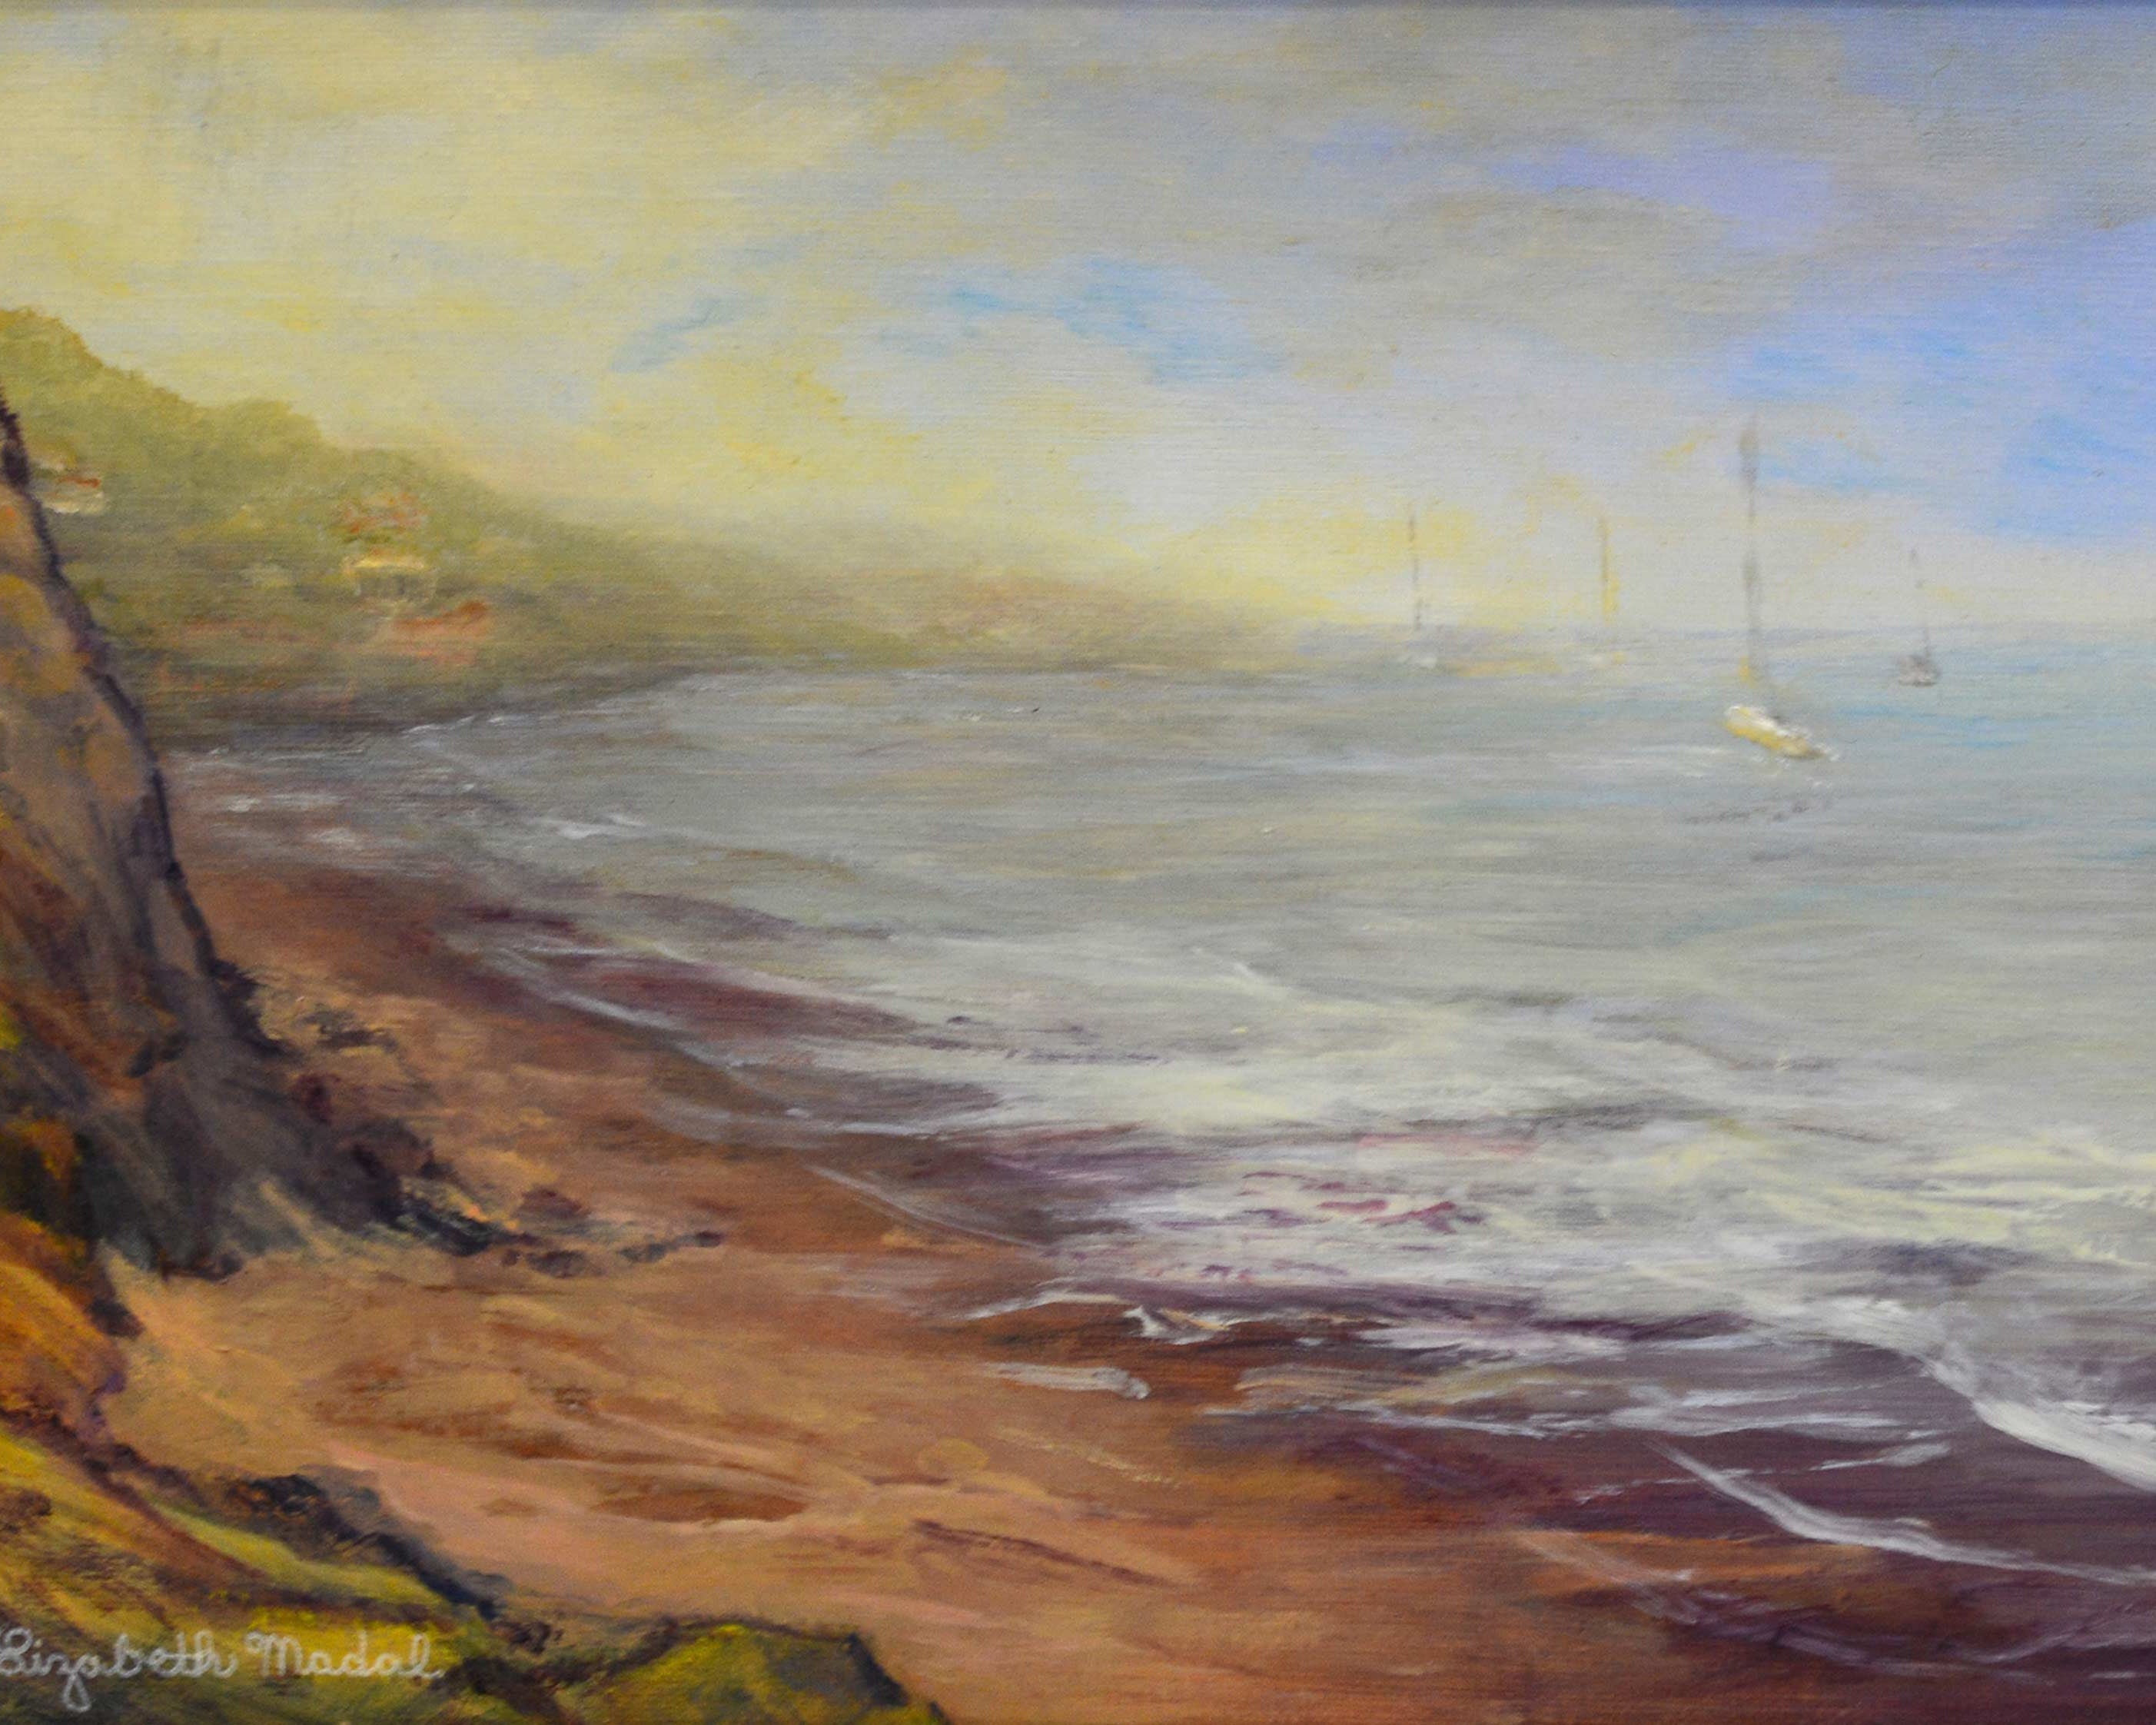 An oil painting of sandy shoreline with sailboats.